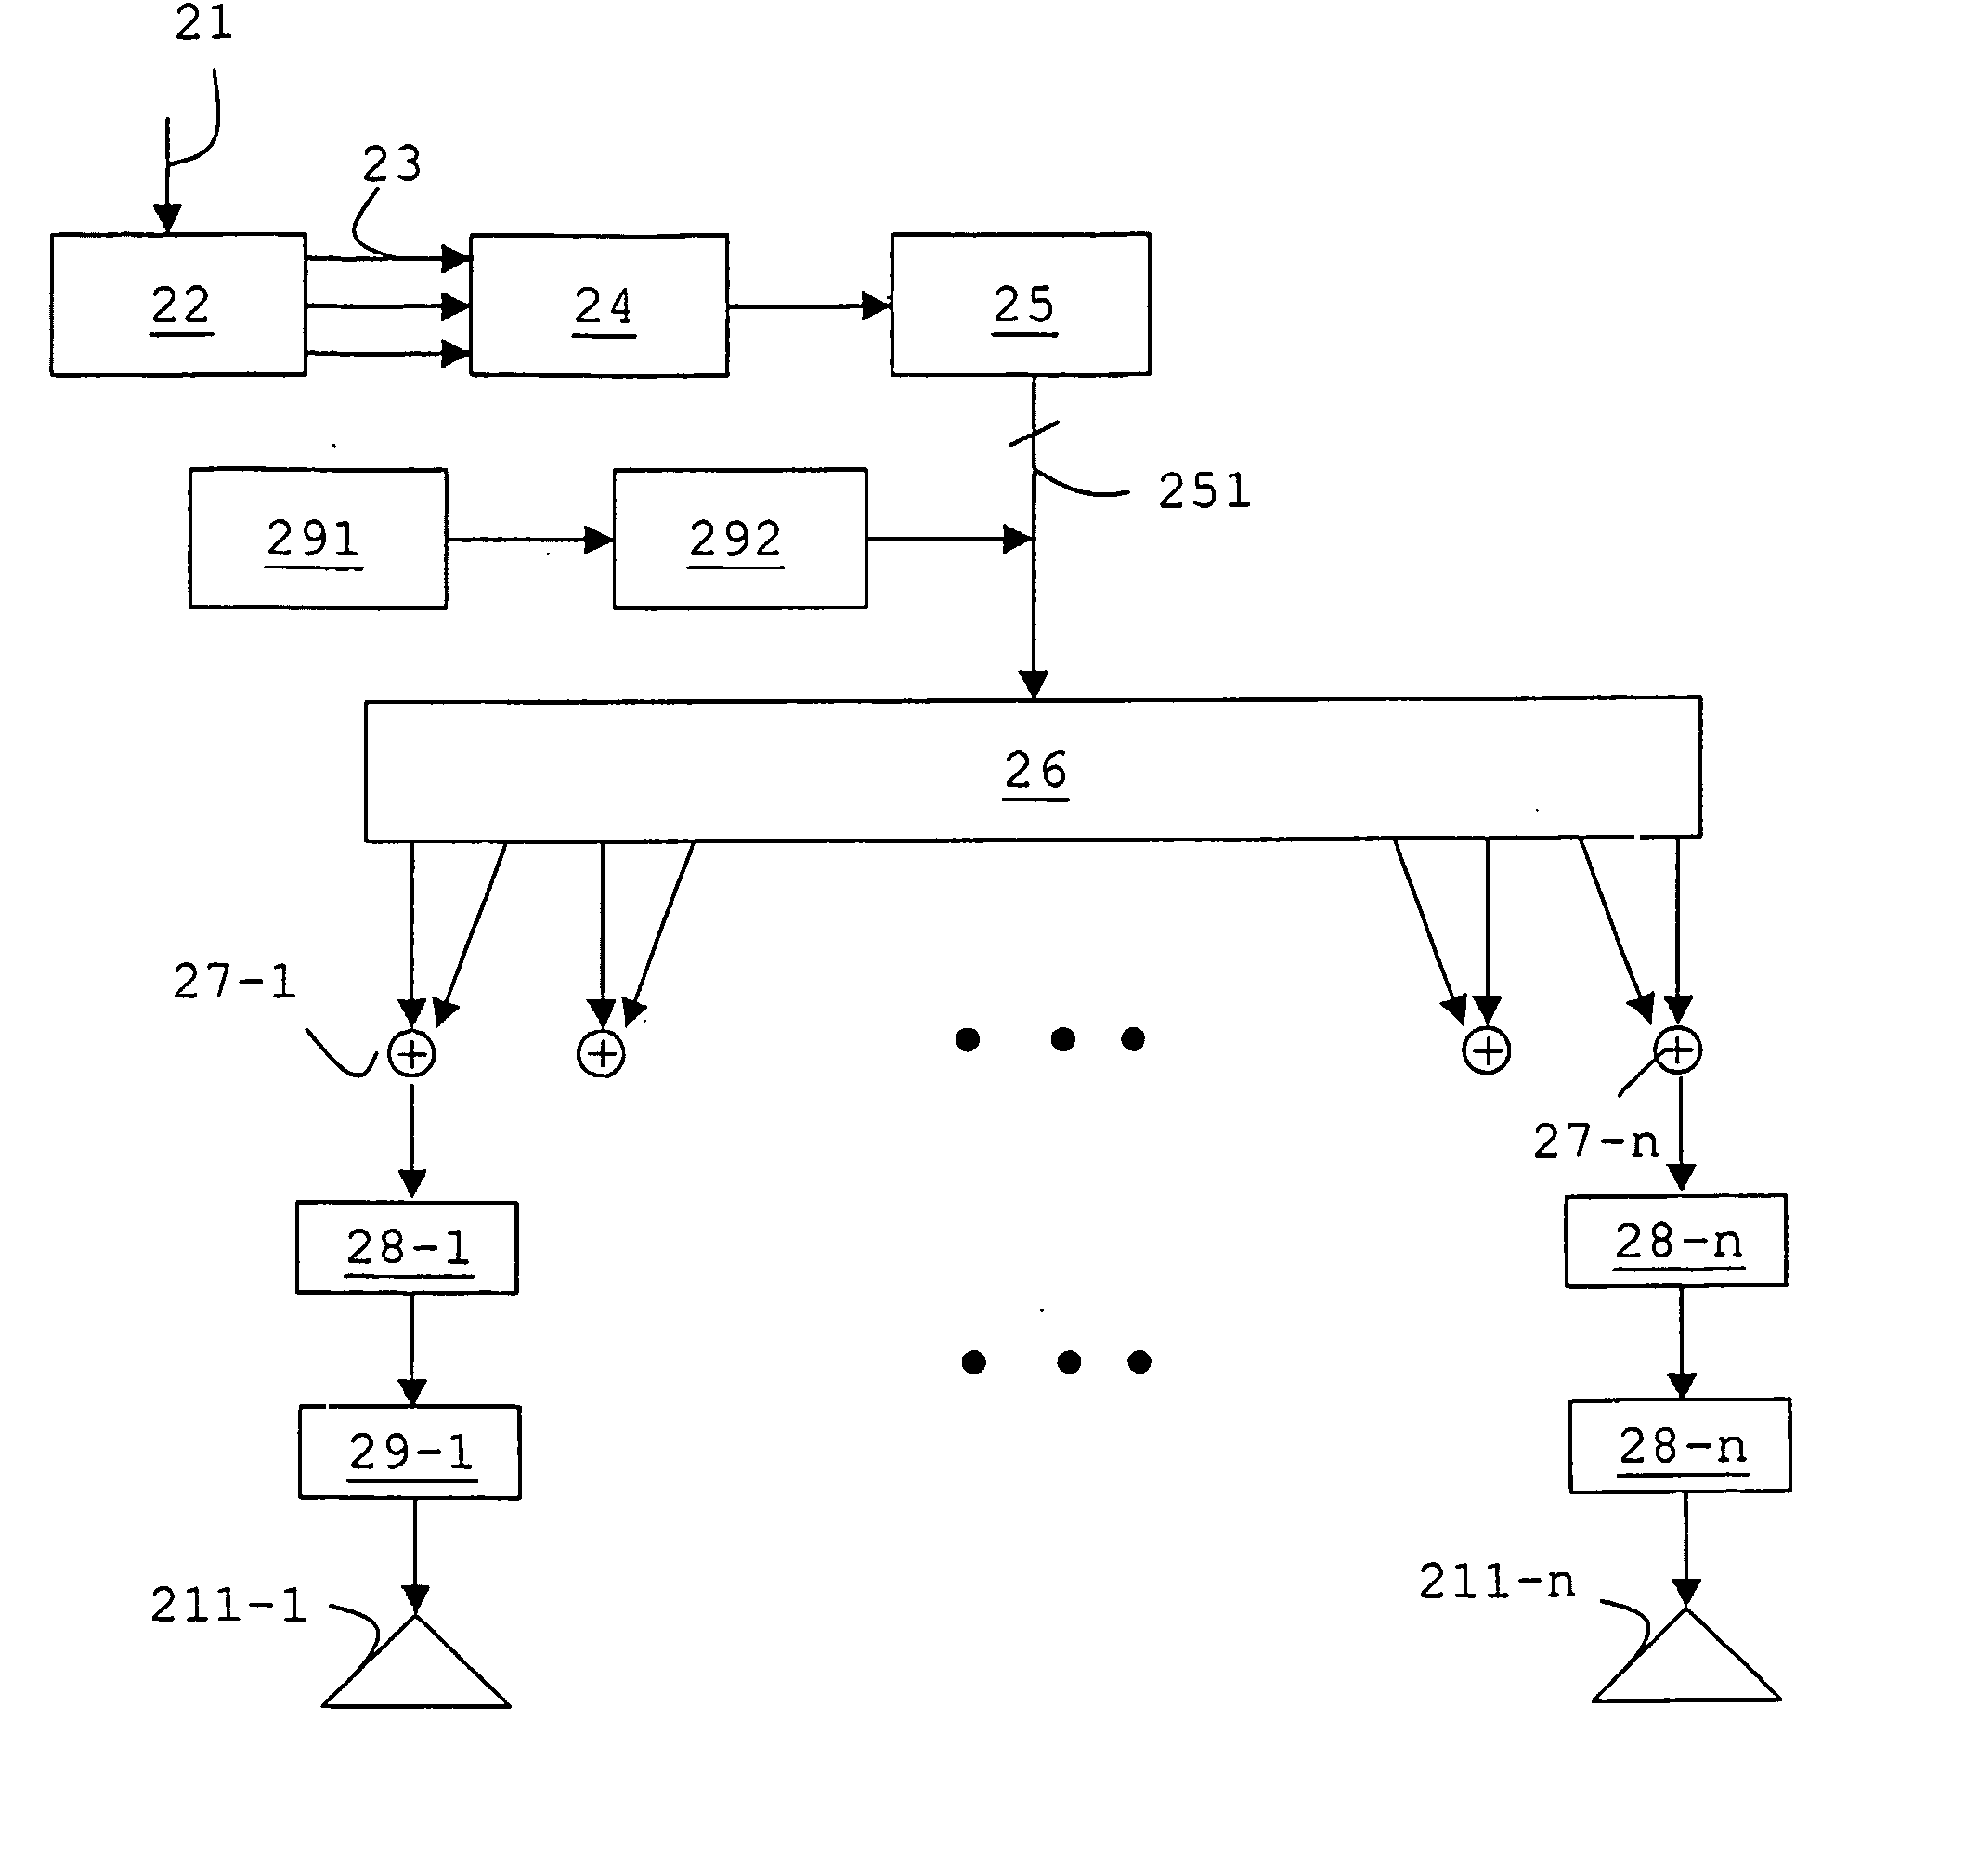 Signal processing device for acoustic transducer array